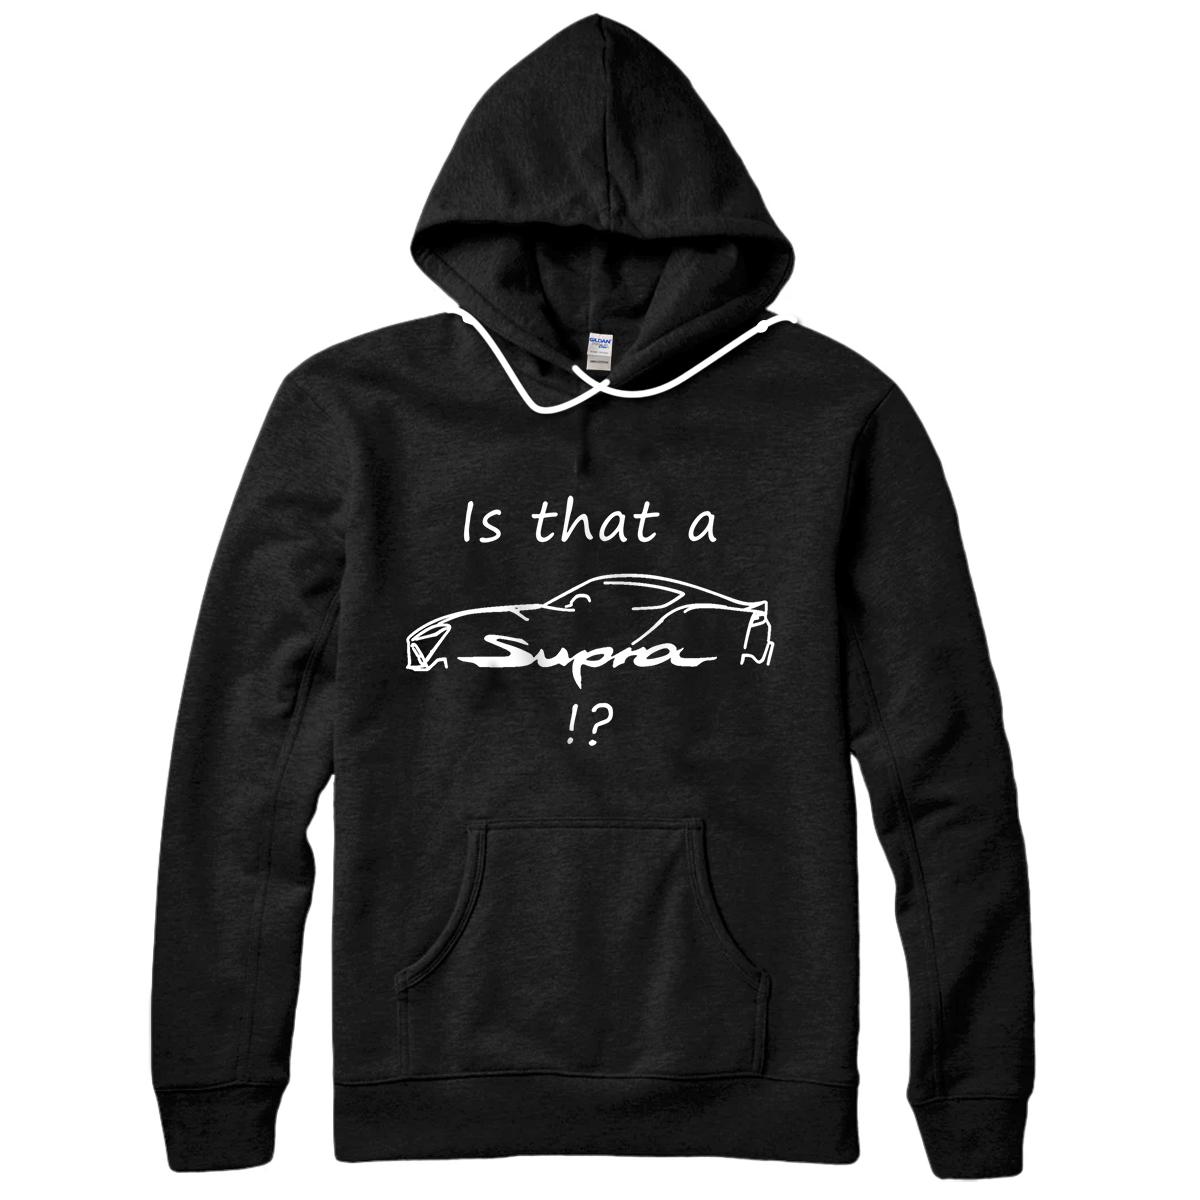 Personalized Is that a supra MK5 Pullover Hoodie